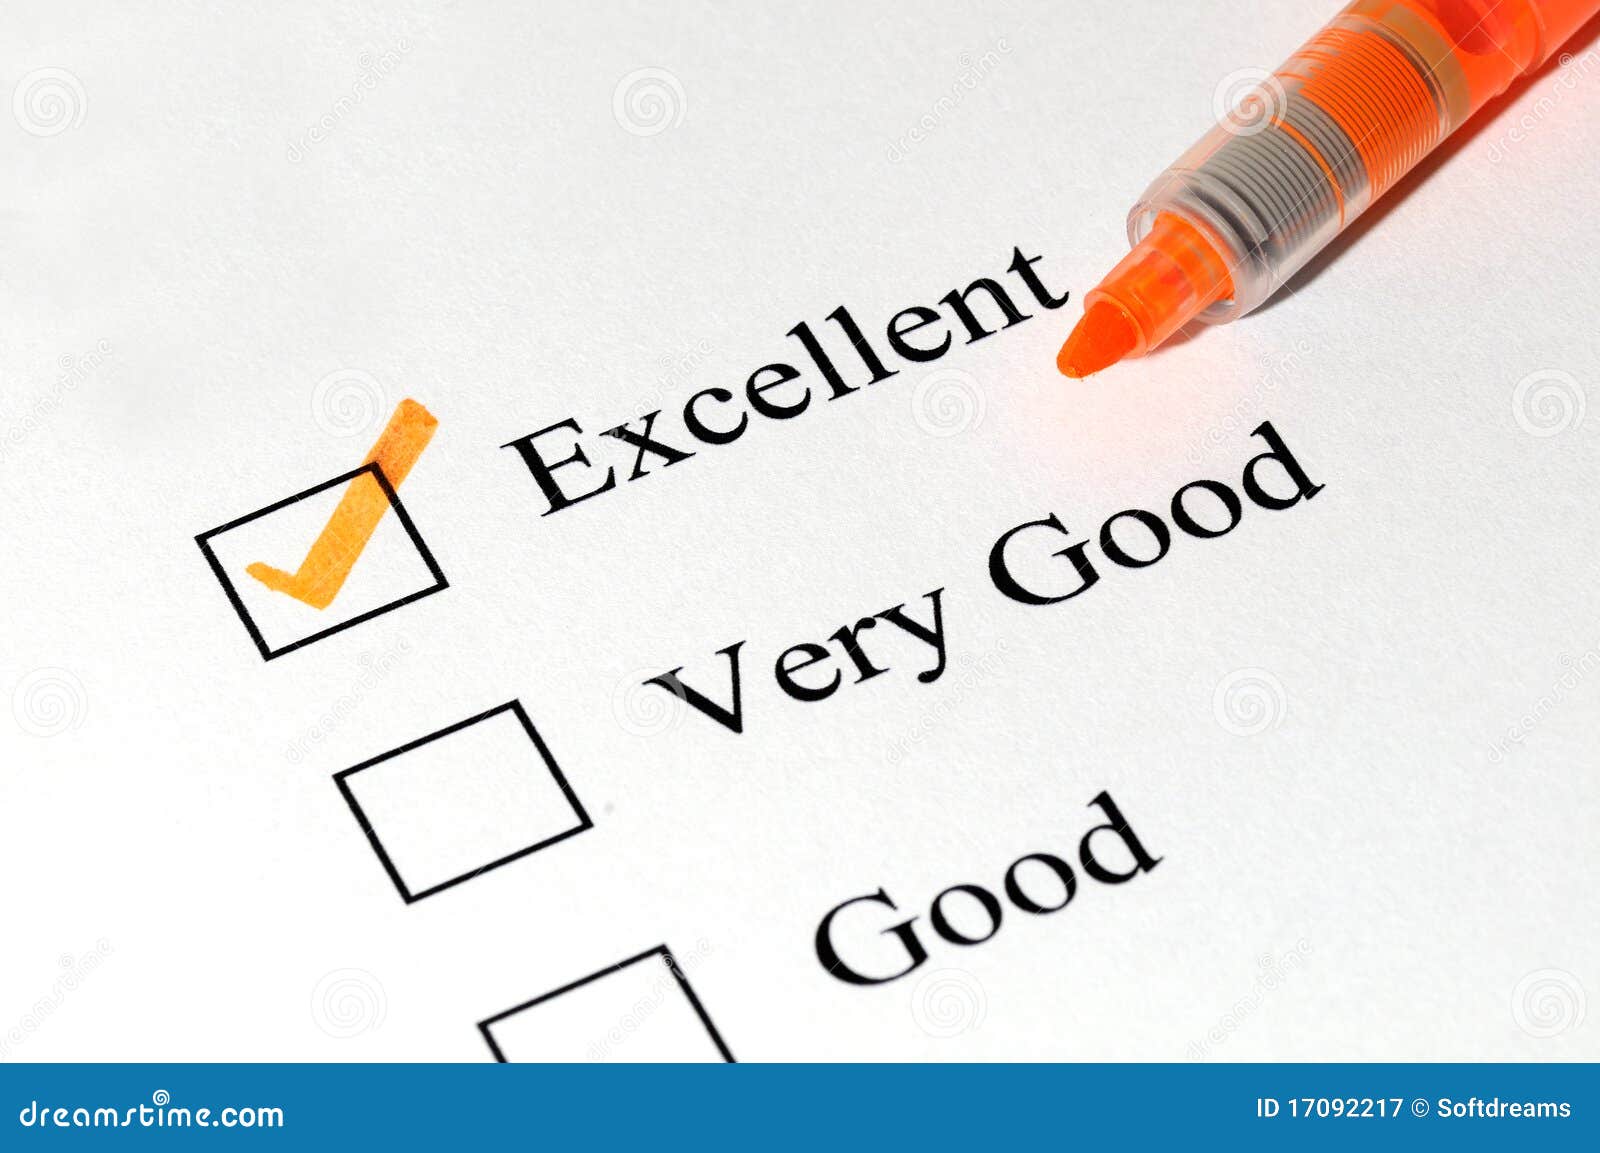 Excellent Very Good Checkboxes Stock Image - Image of ...